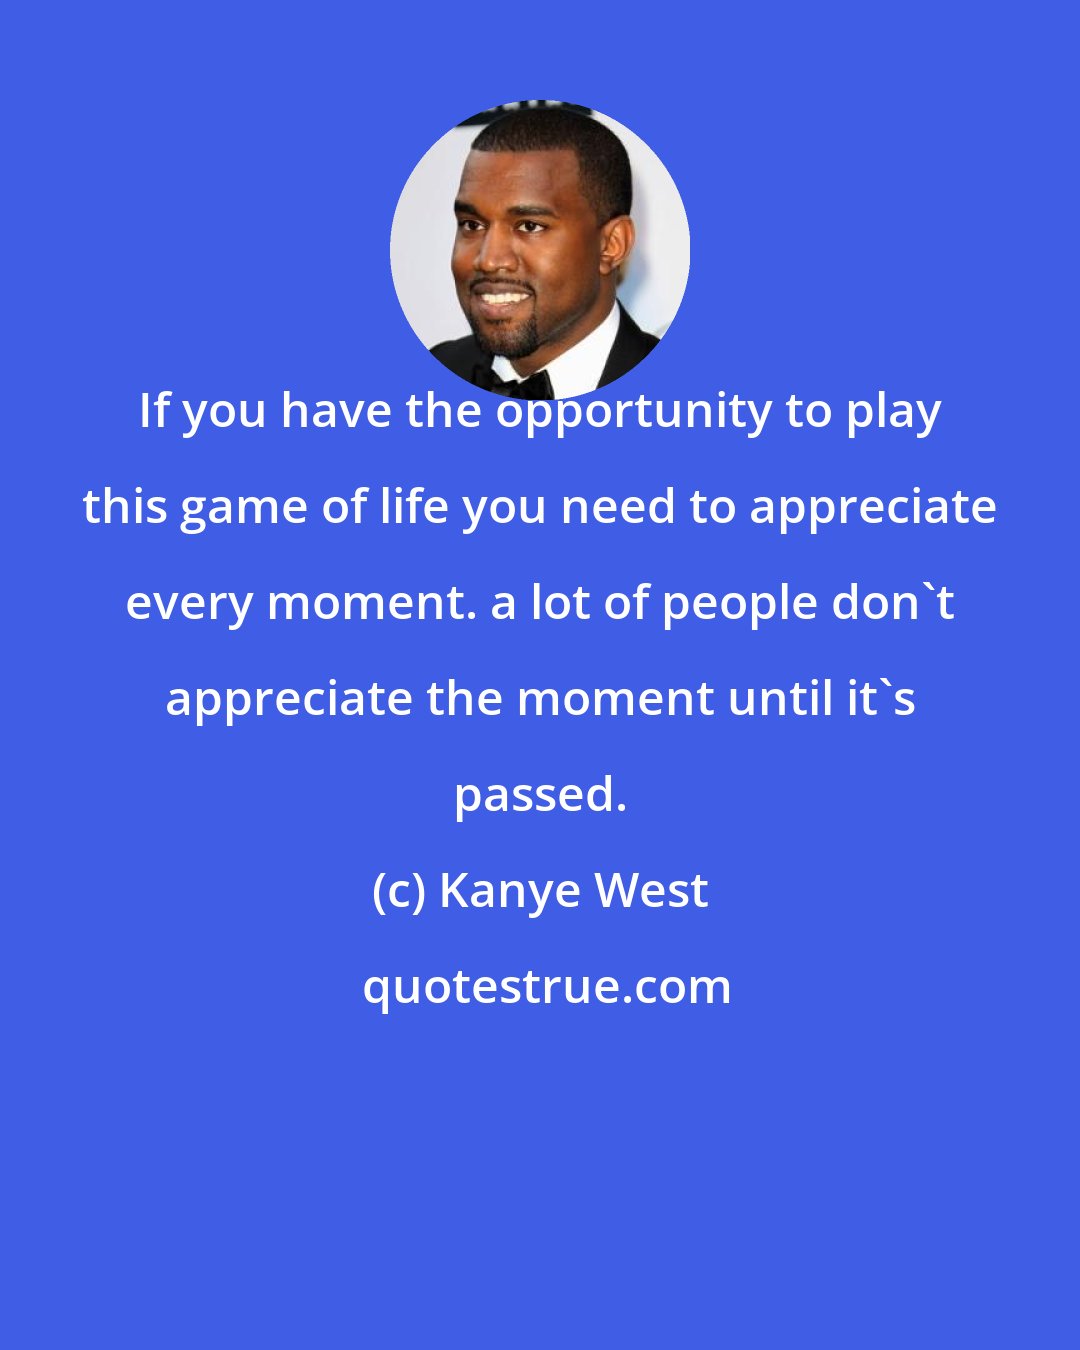 Kanye West: If you have the opportunity to play this game of life you need to appreciate every moment. a lot of people don't appreciate the moment until it's passed.